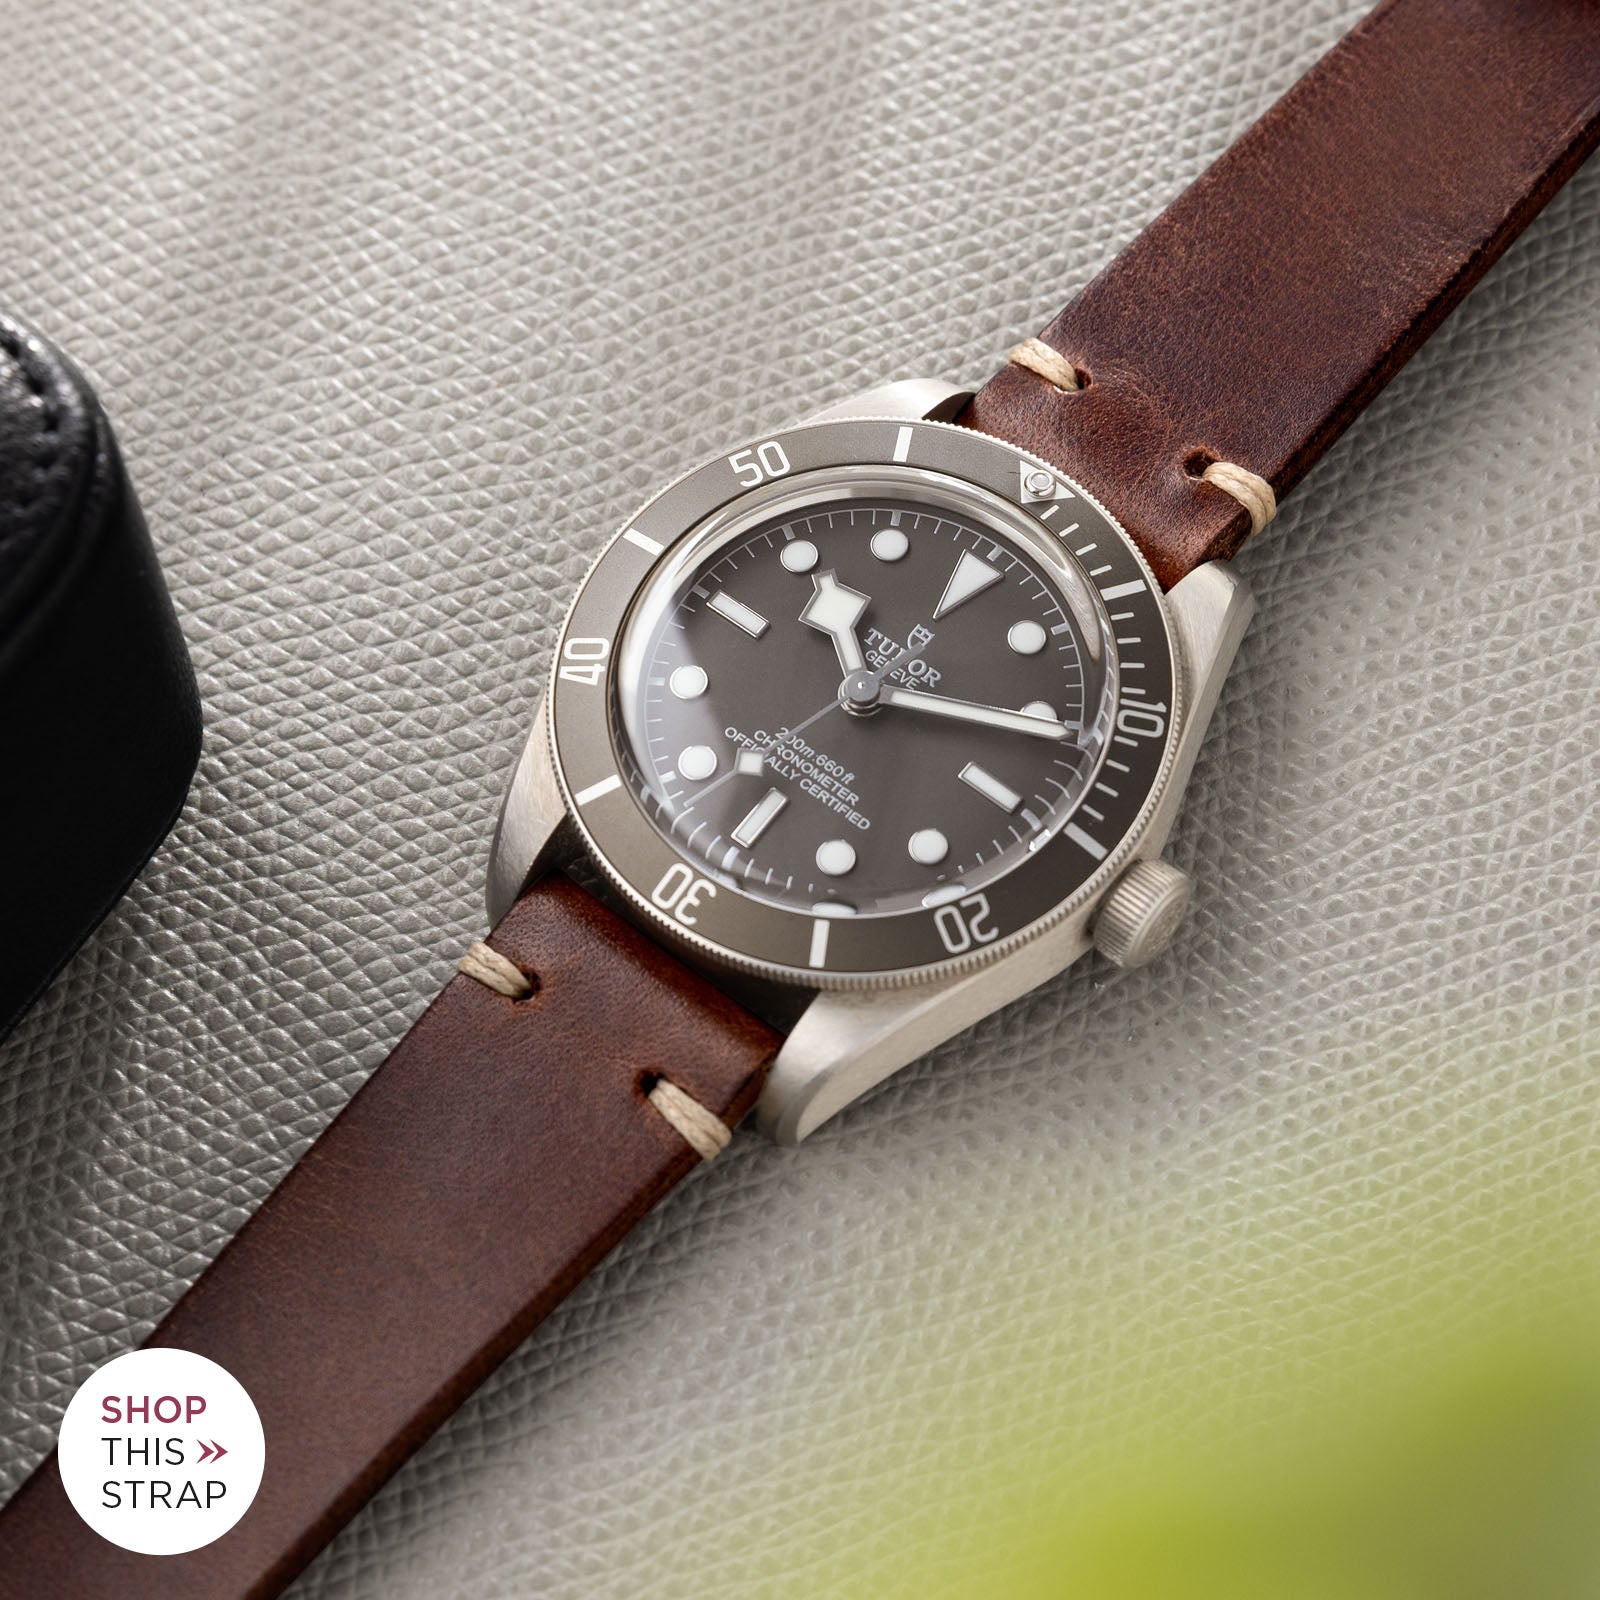 B and S_S G_Sons_Strap Guide_Tudor Black Bay Fifty Eight 925 Silver_Siena Brown Leather Watch Strap